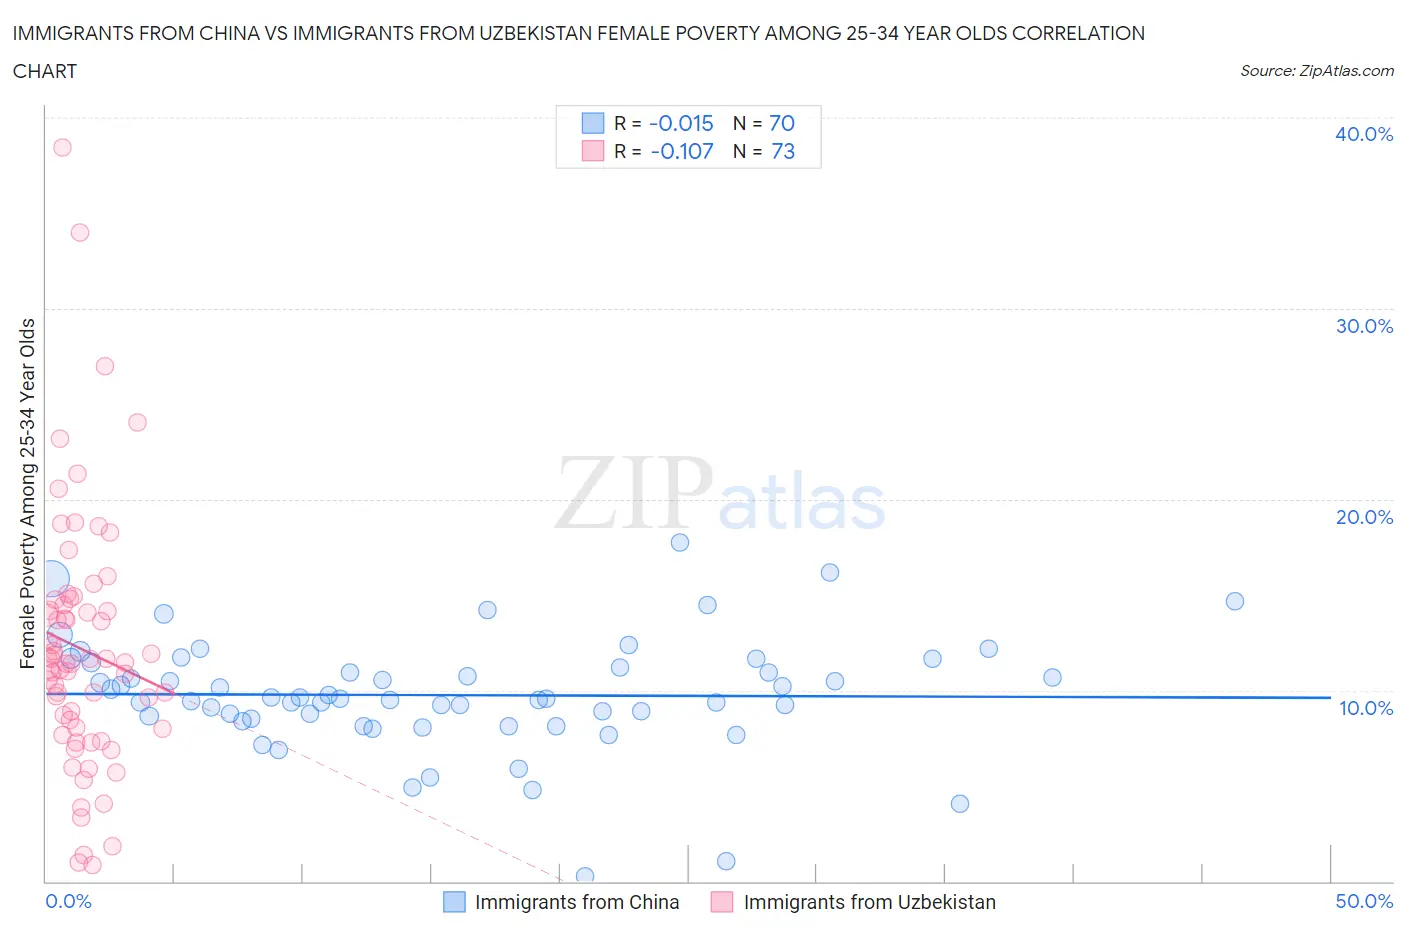 Immigrants from China vs Immigrants from Uzbekistan Female Poverty Among 25-34 Year Olds